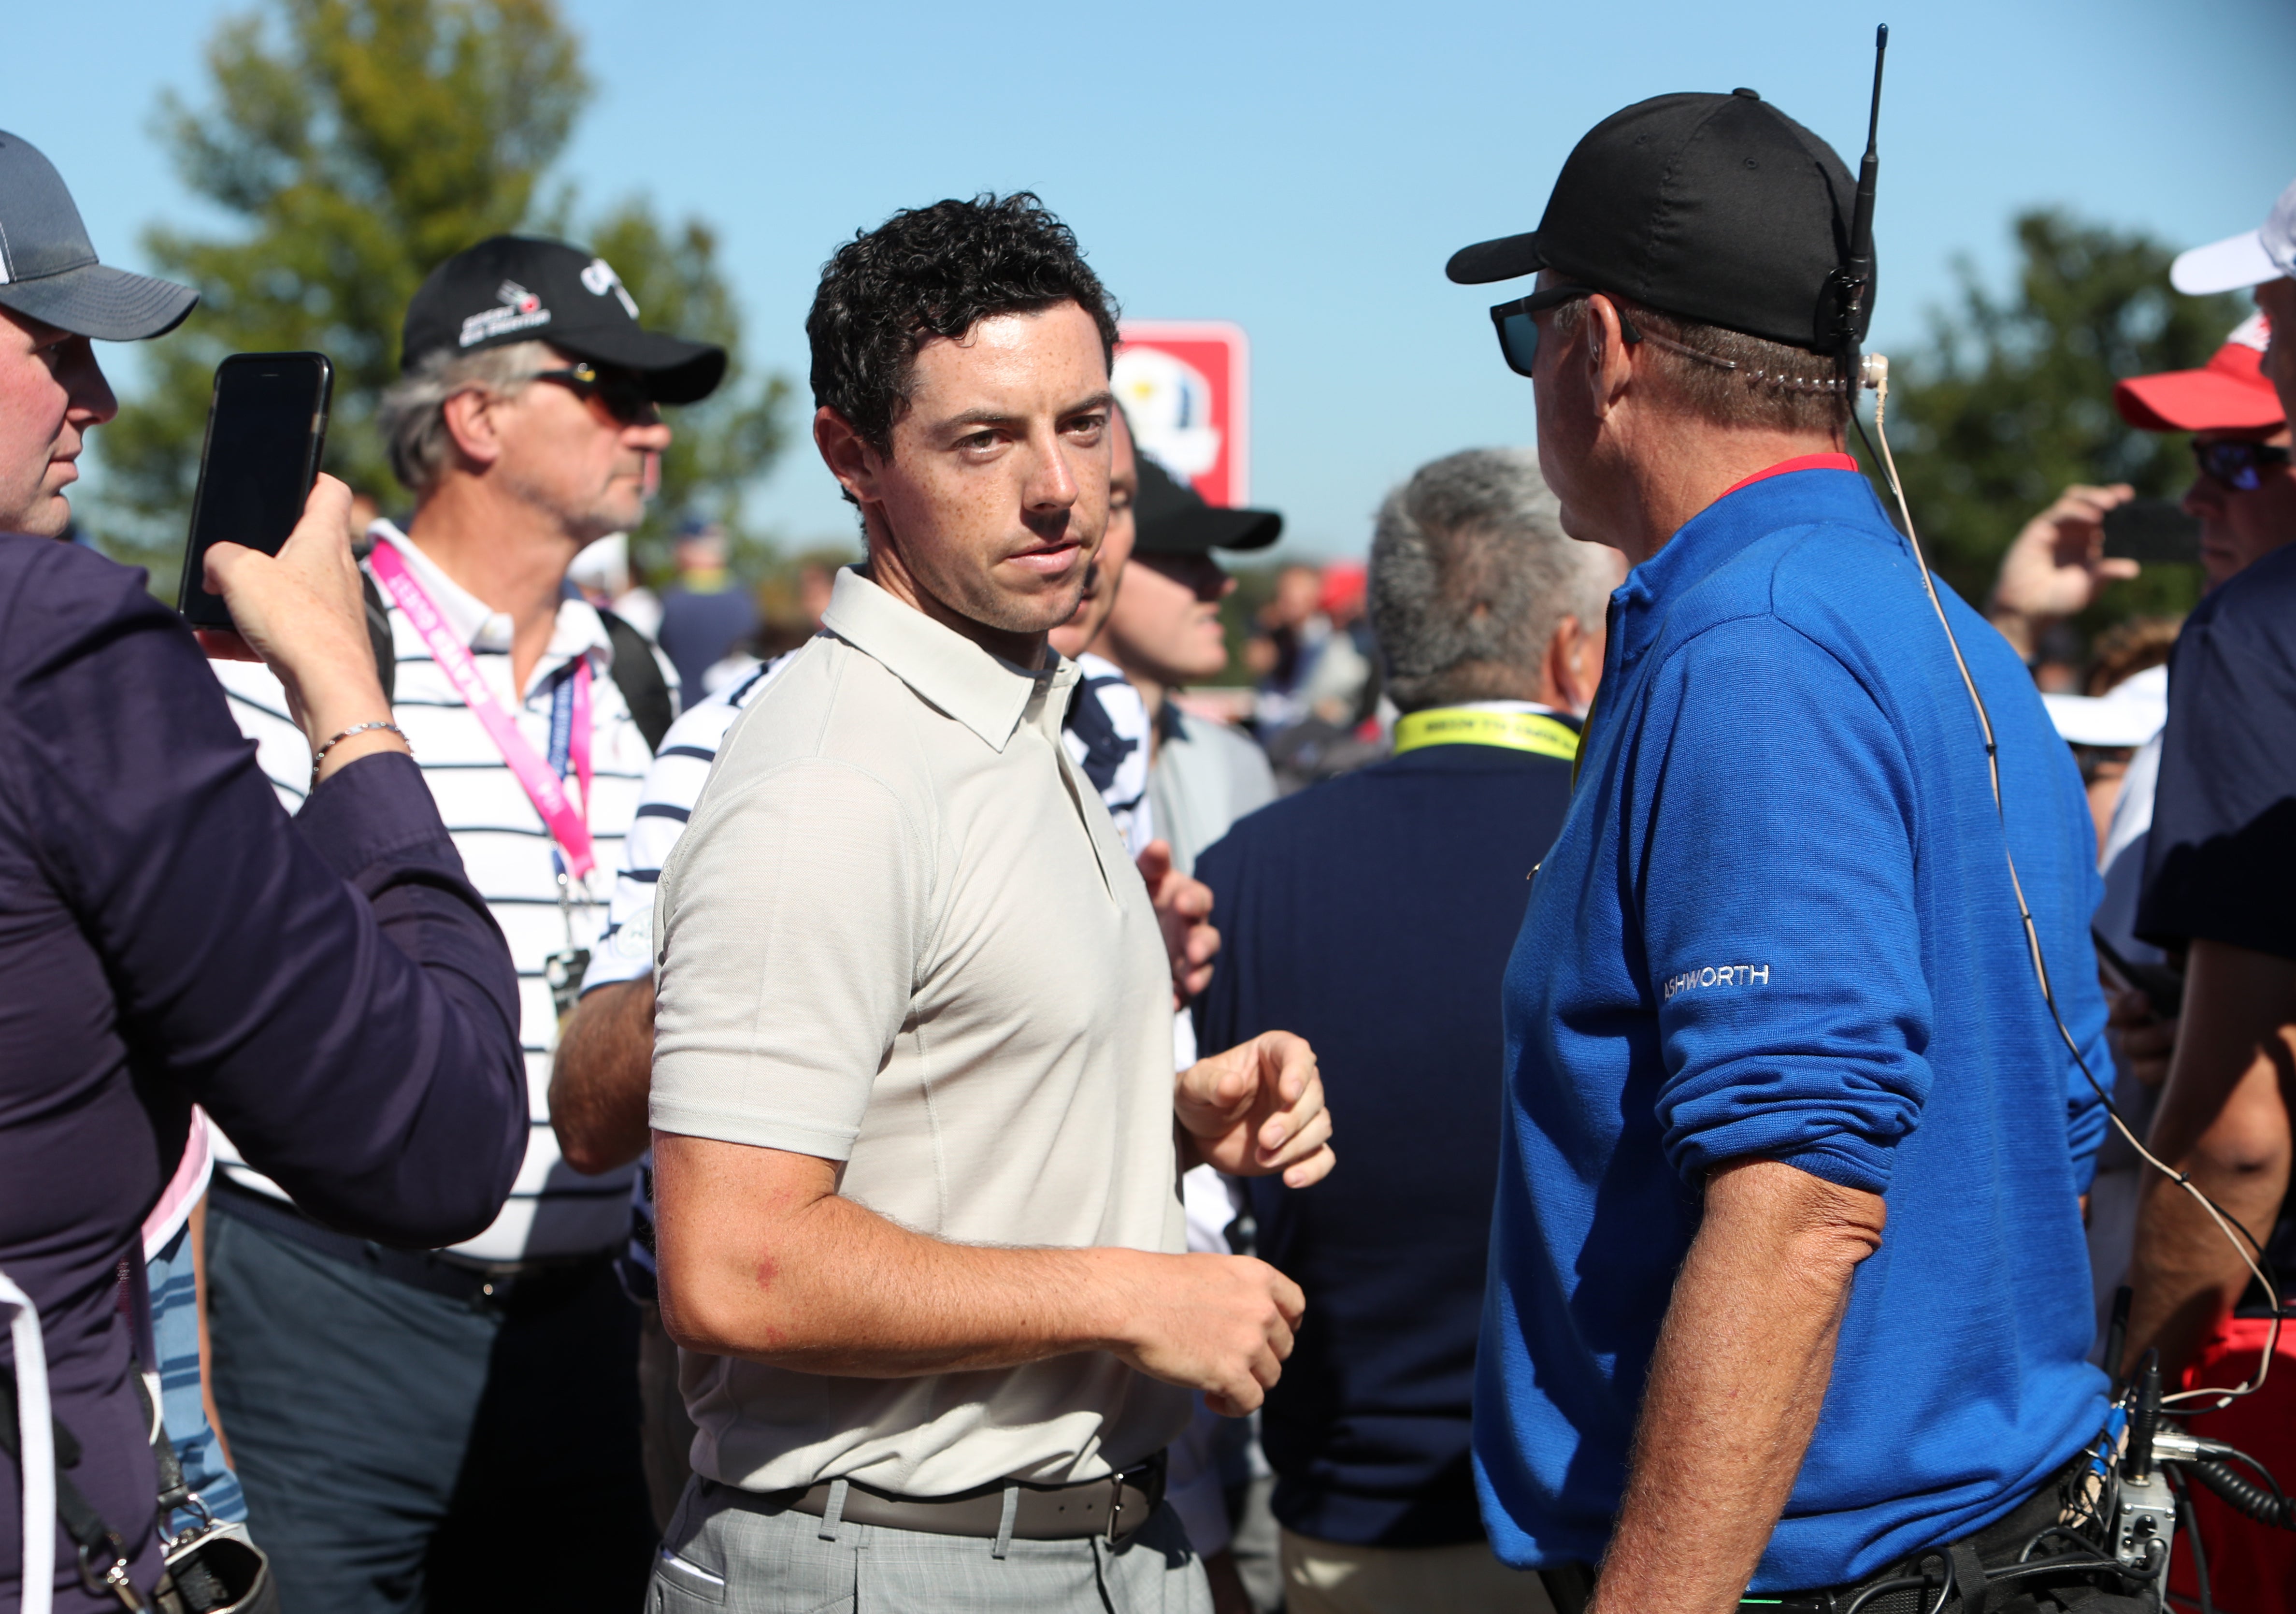 Rory McIlroy asked for an abusive spectator to be removed during the 2016 Ryder Cup (David Davies/PA)